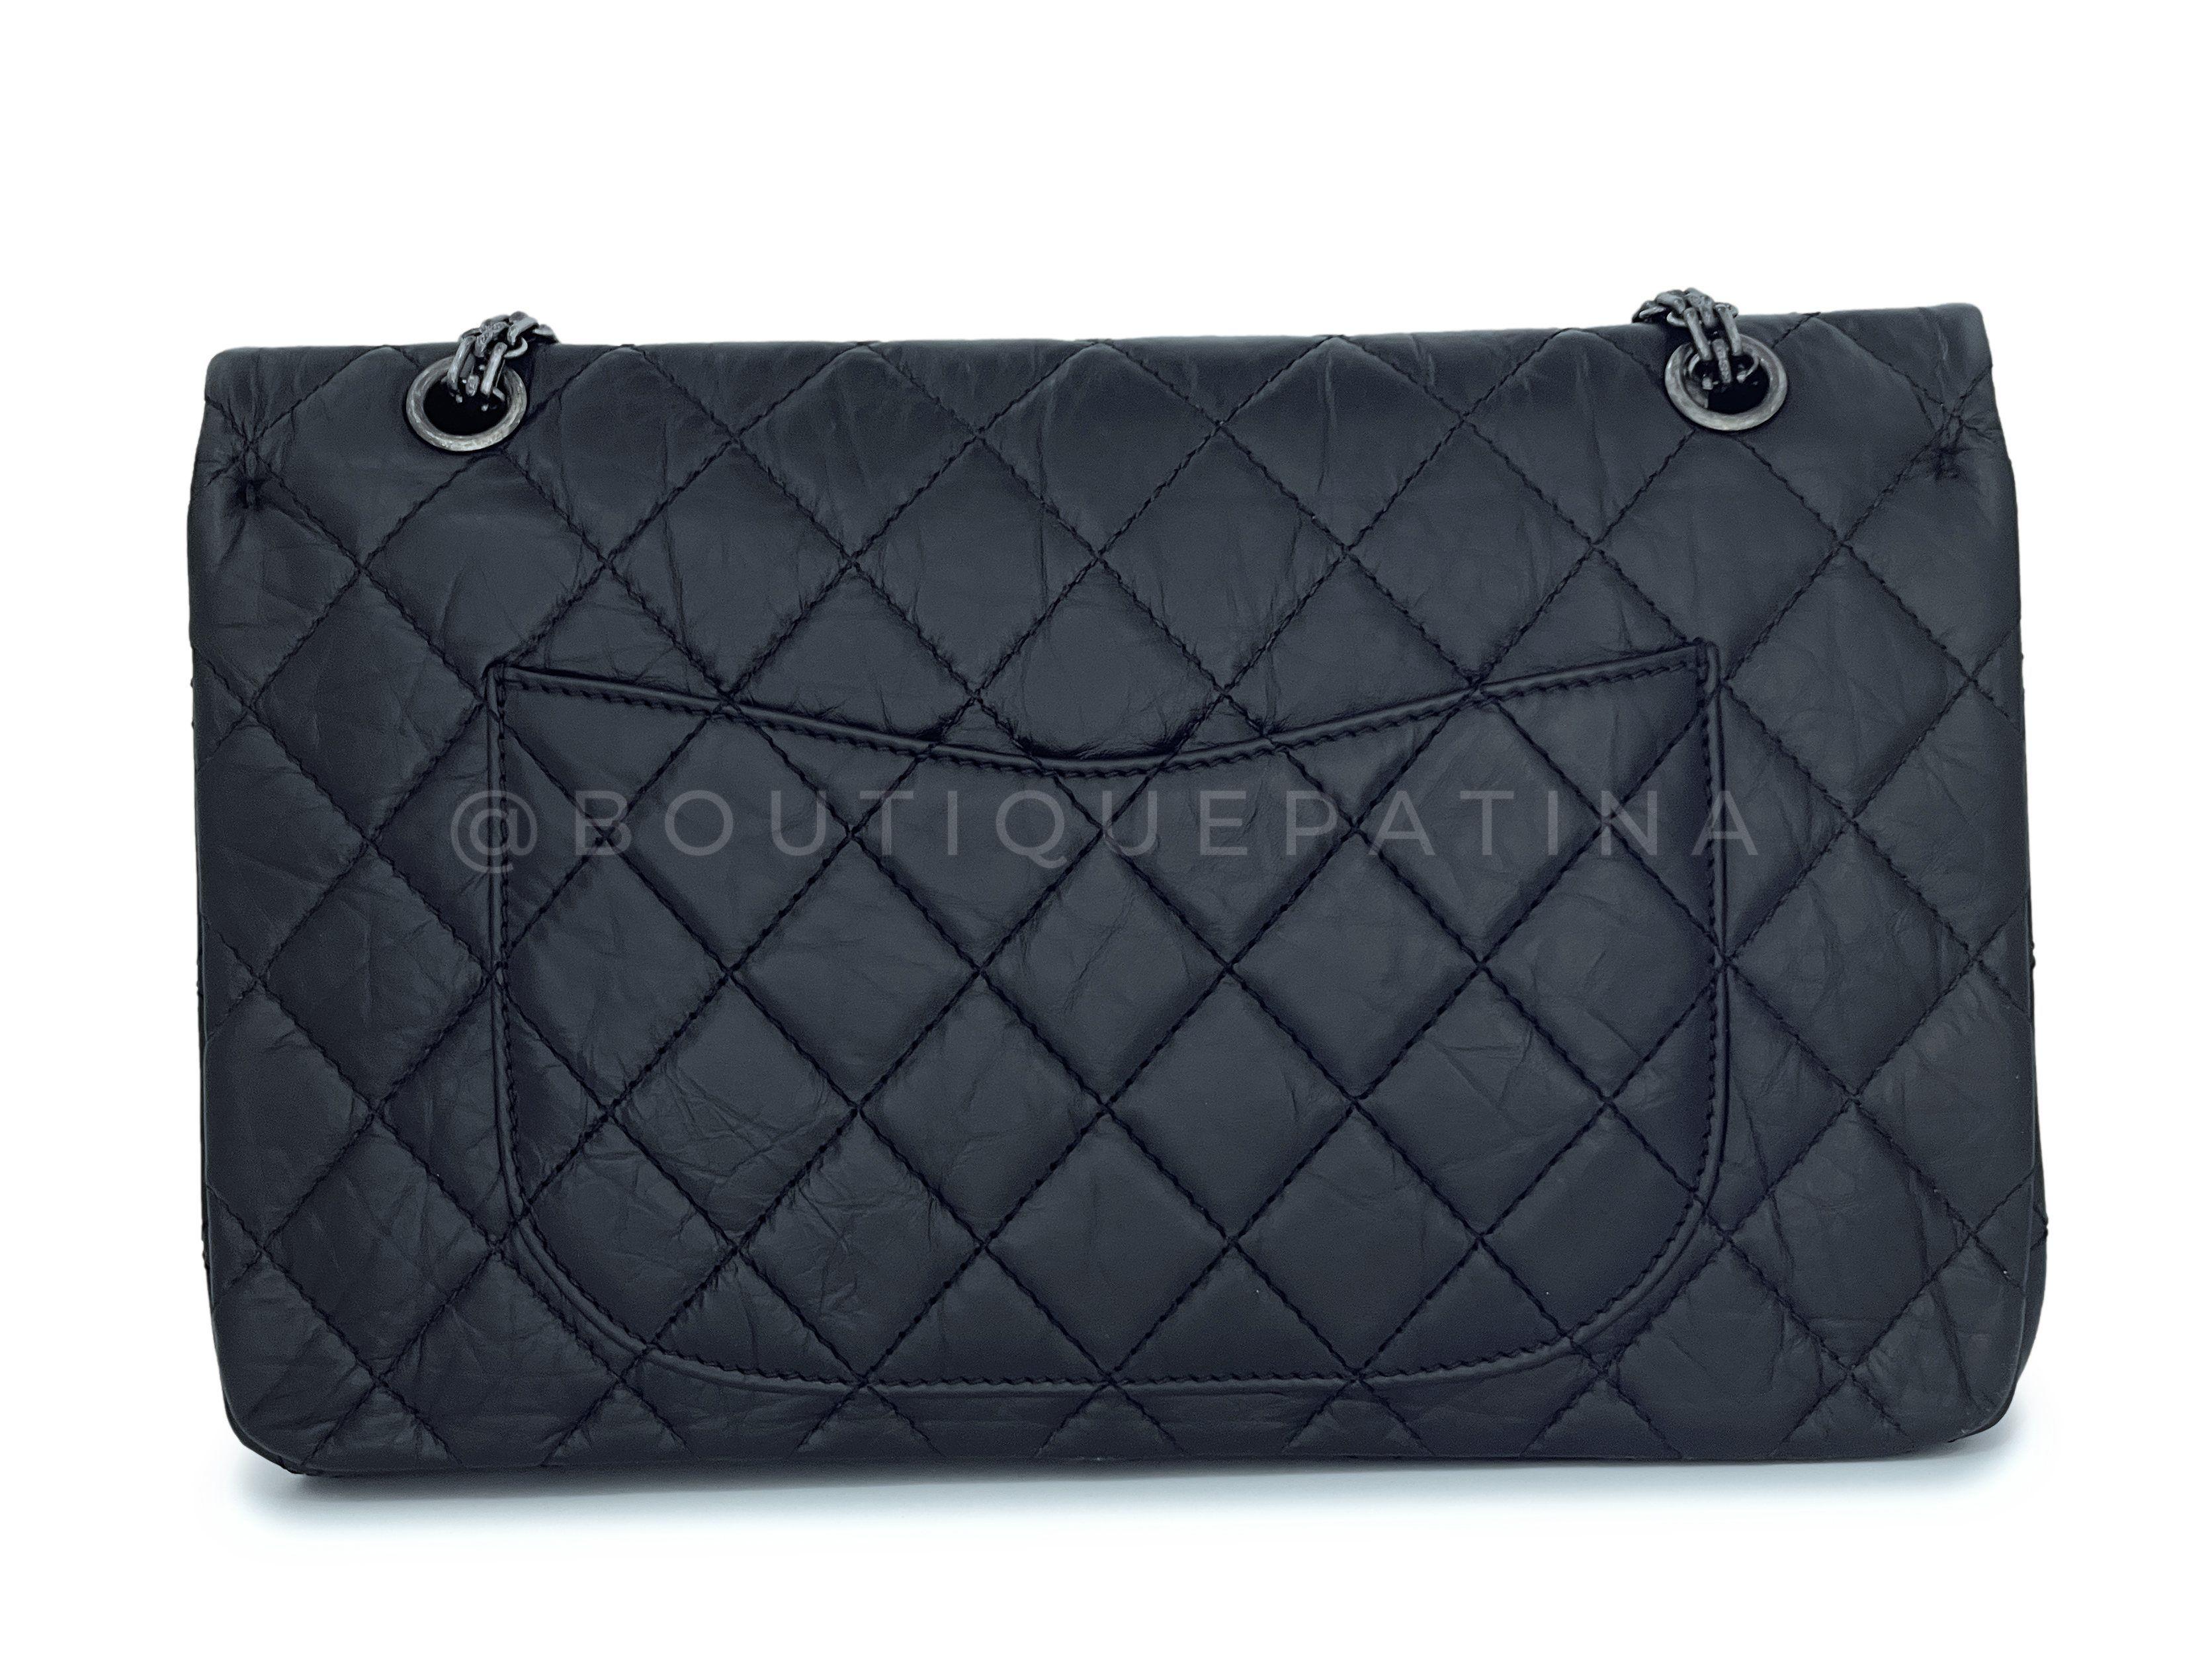 Pristine Chanel Black Aged Calfskin 2.55 Reissue 227 Double Flap Bag RHW 64730 For Sale 1